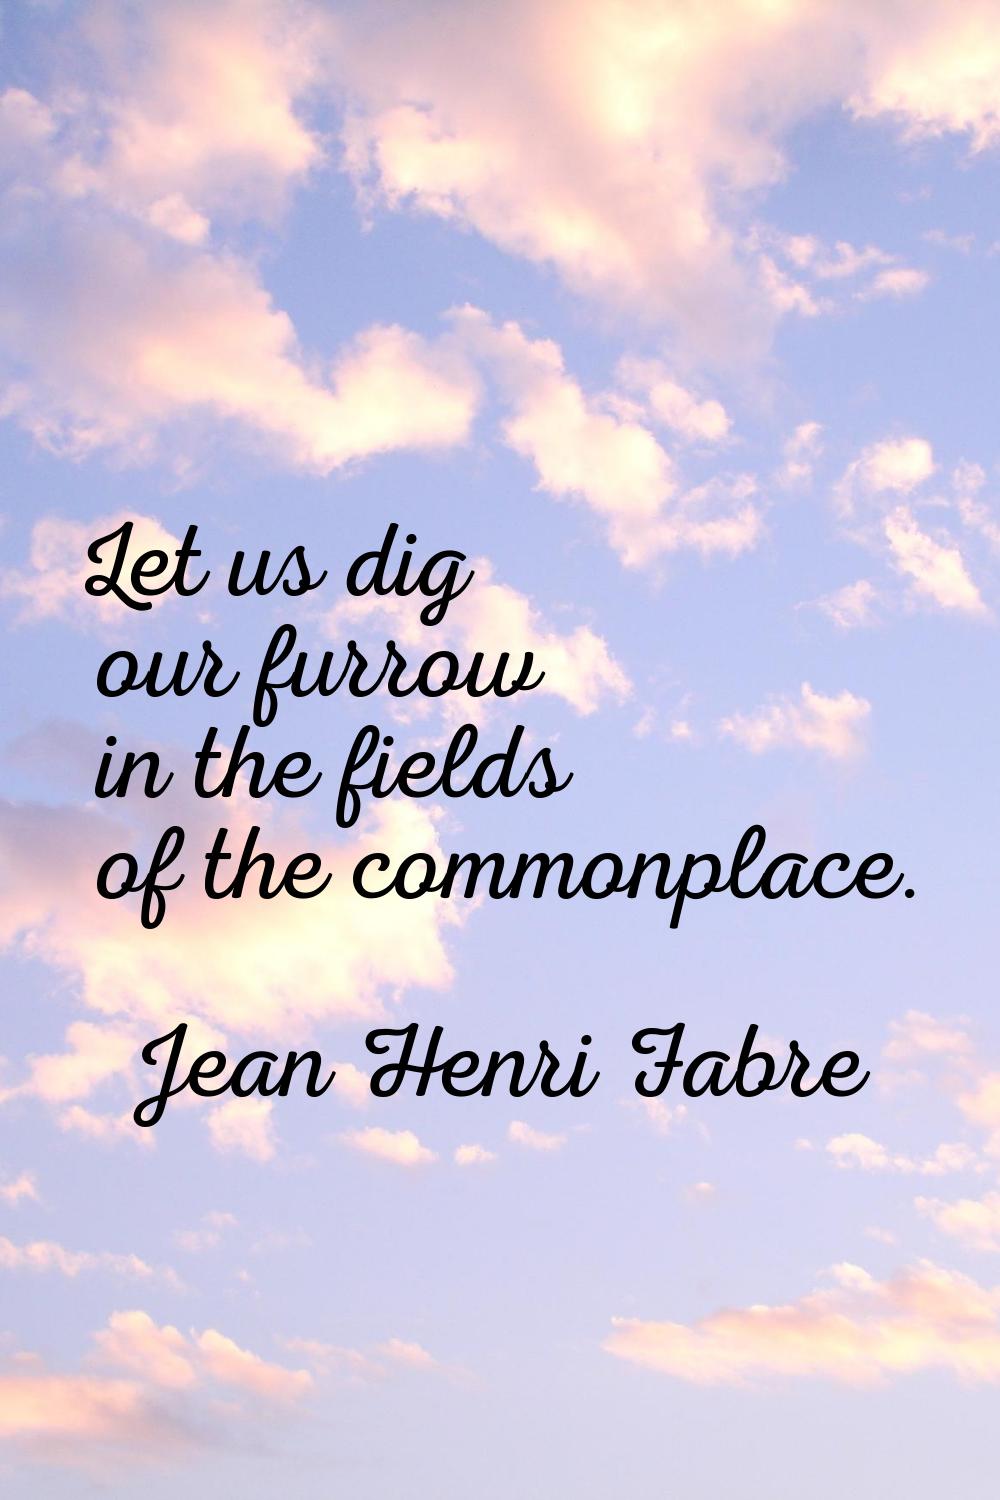 Let us dig our furrow in the fields of the commonplace.